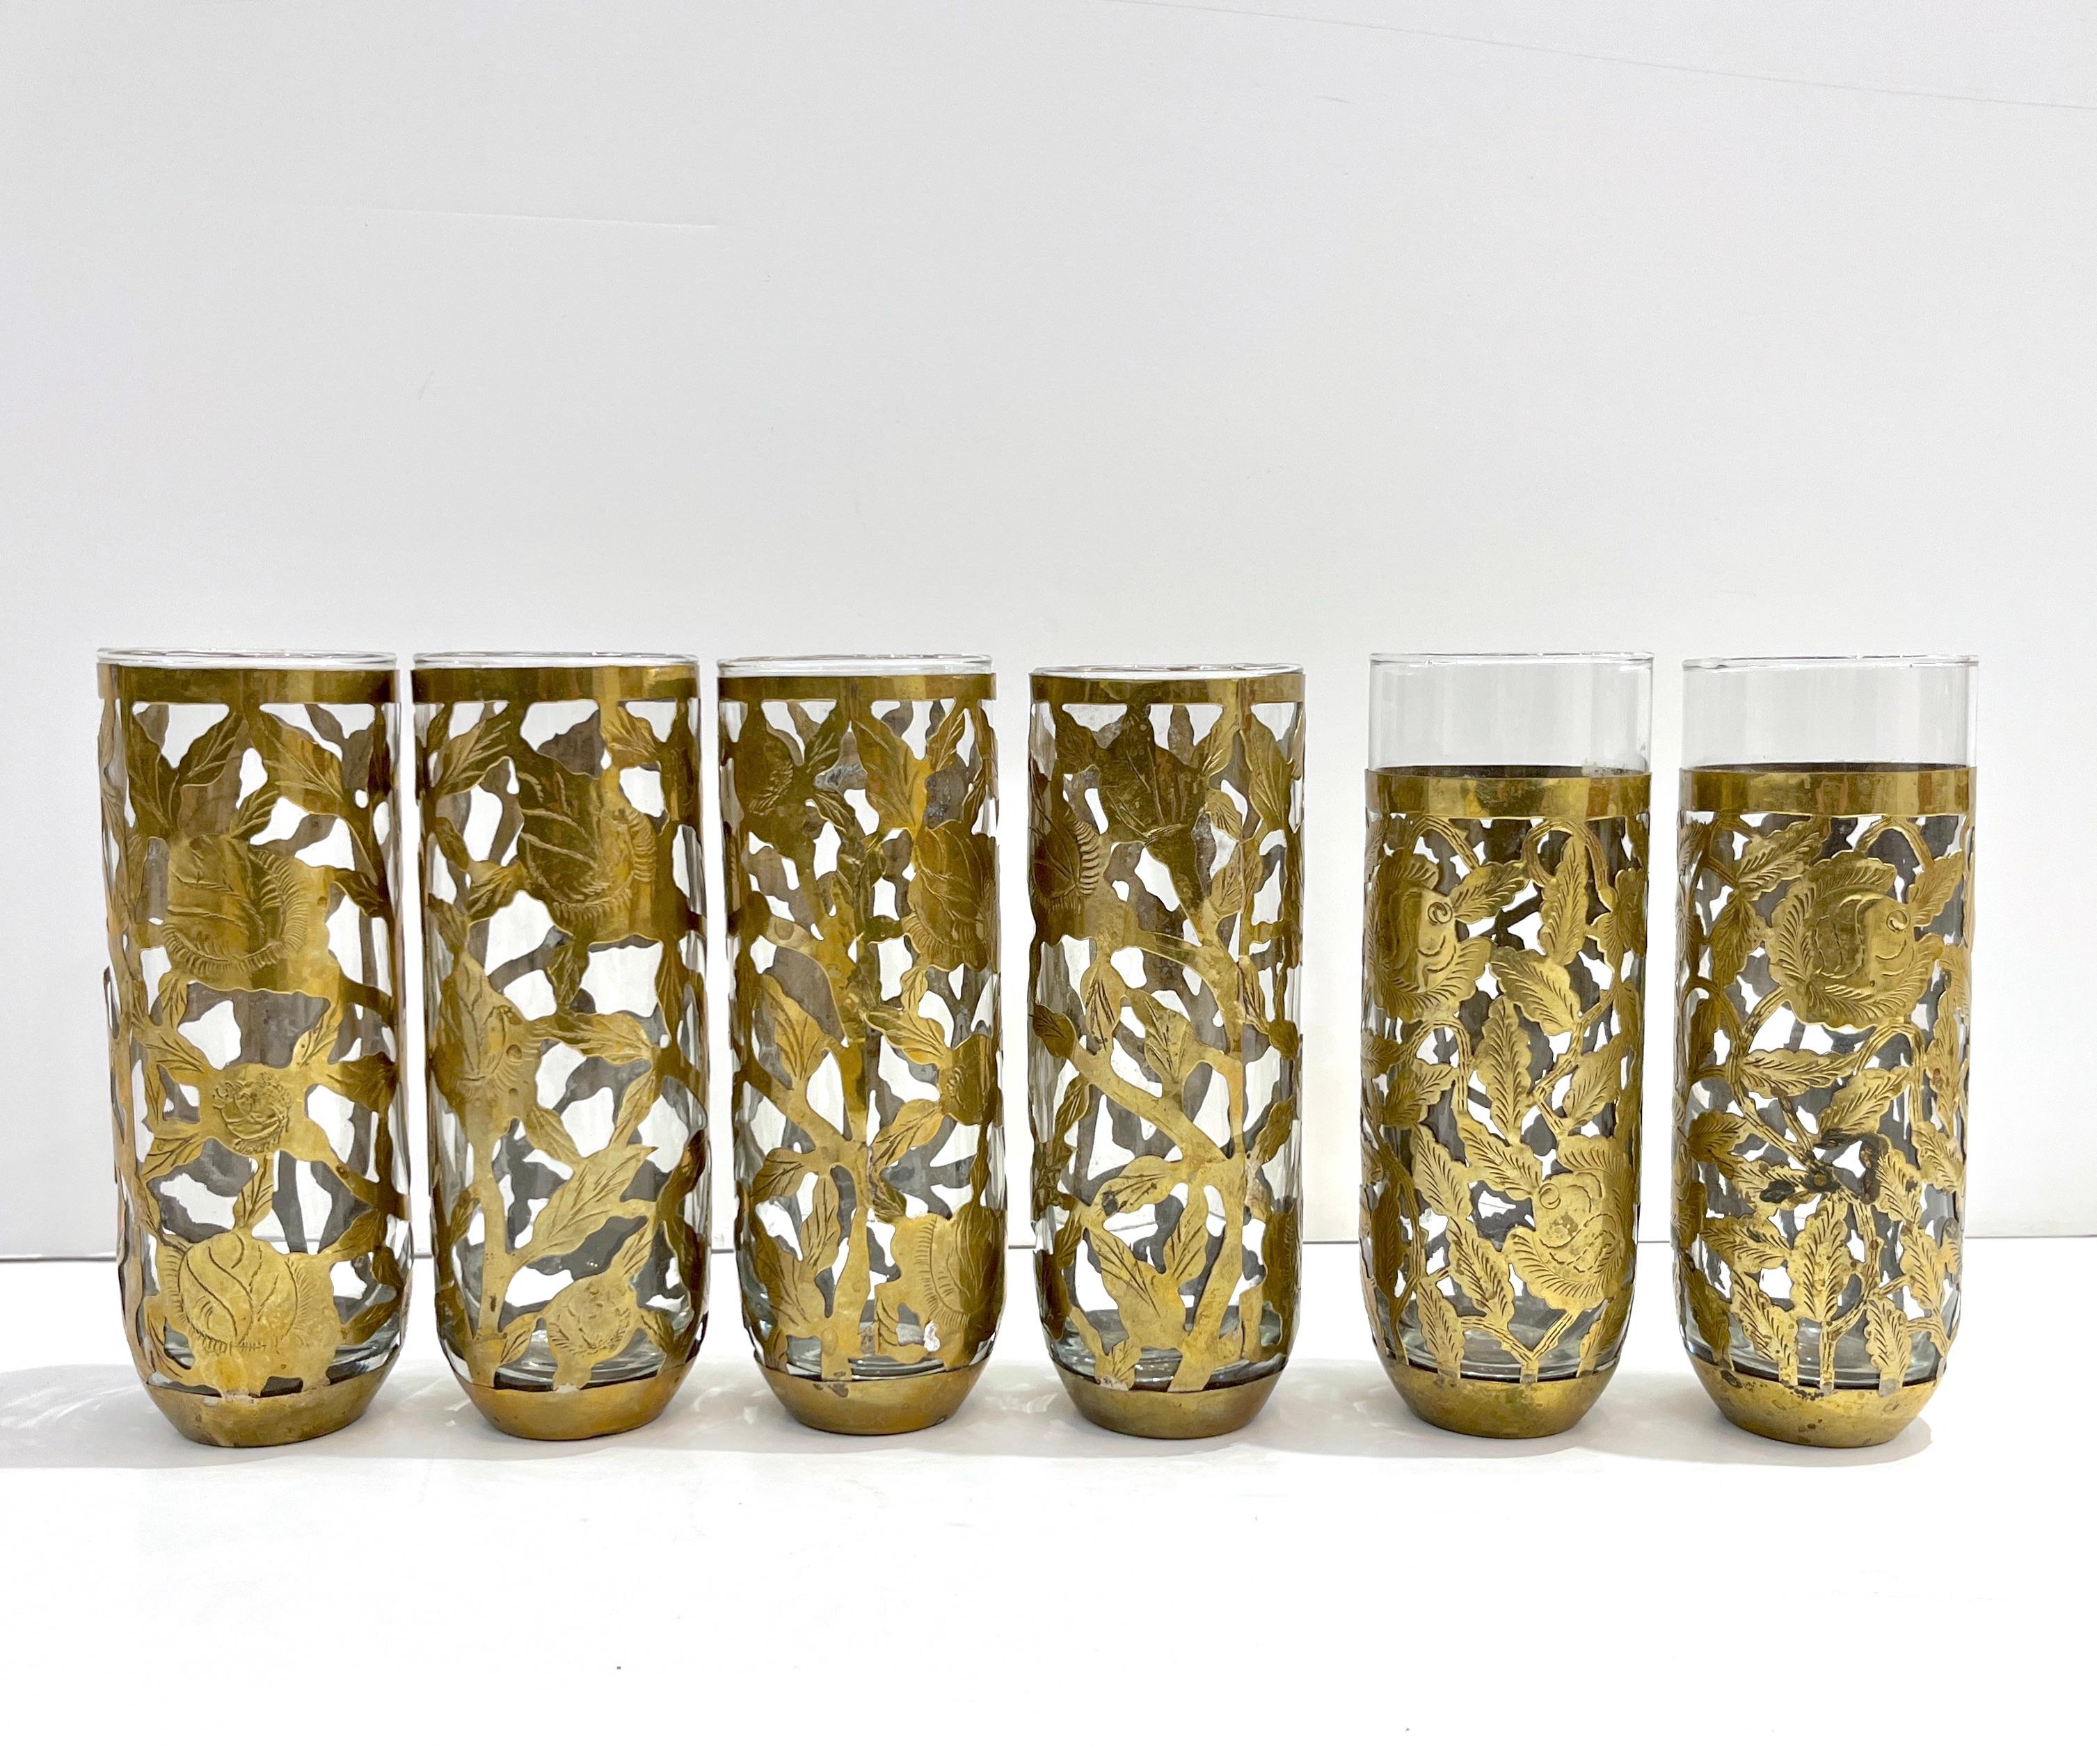 1960 Mexican Set 4 Drinking Glasses Encased in Etched Cutwork Floral Brass Decor For Sale 2